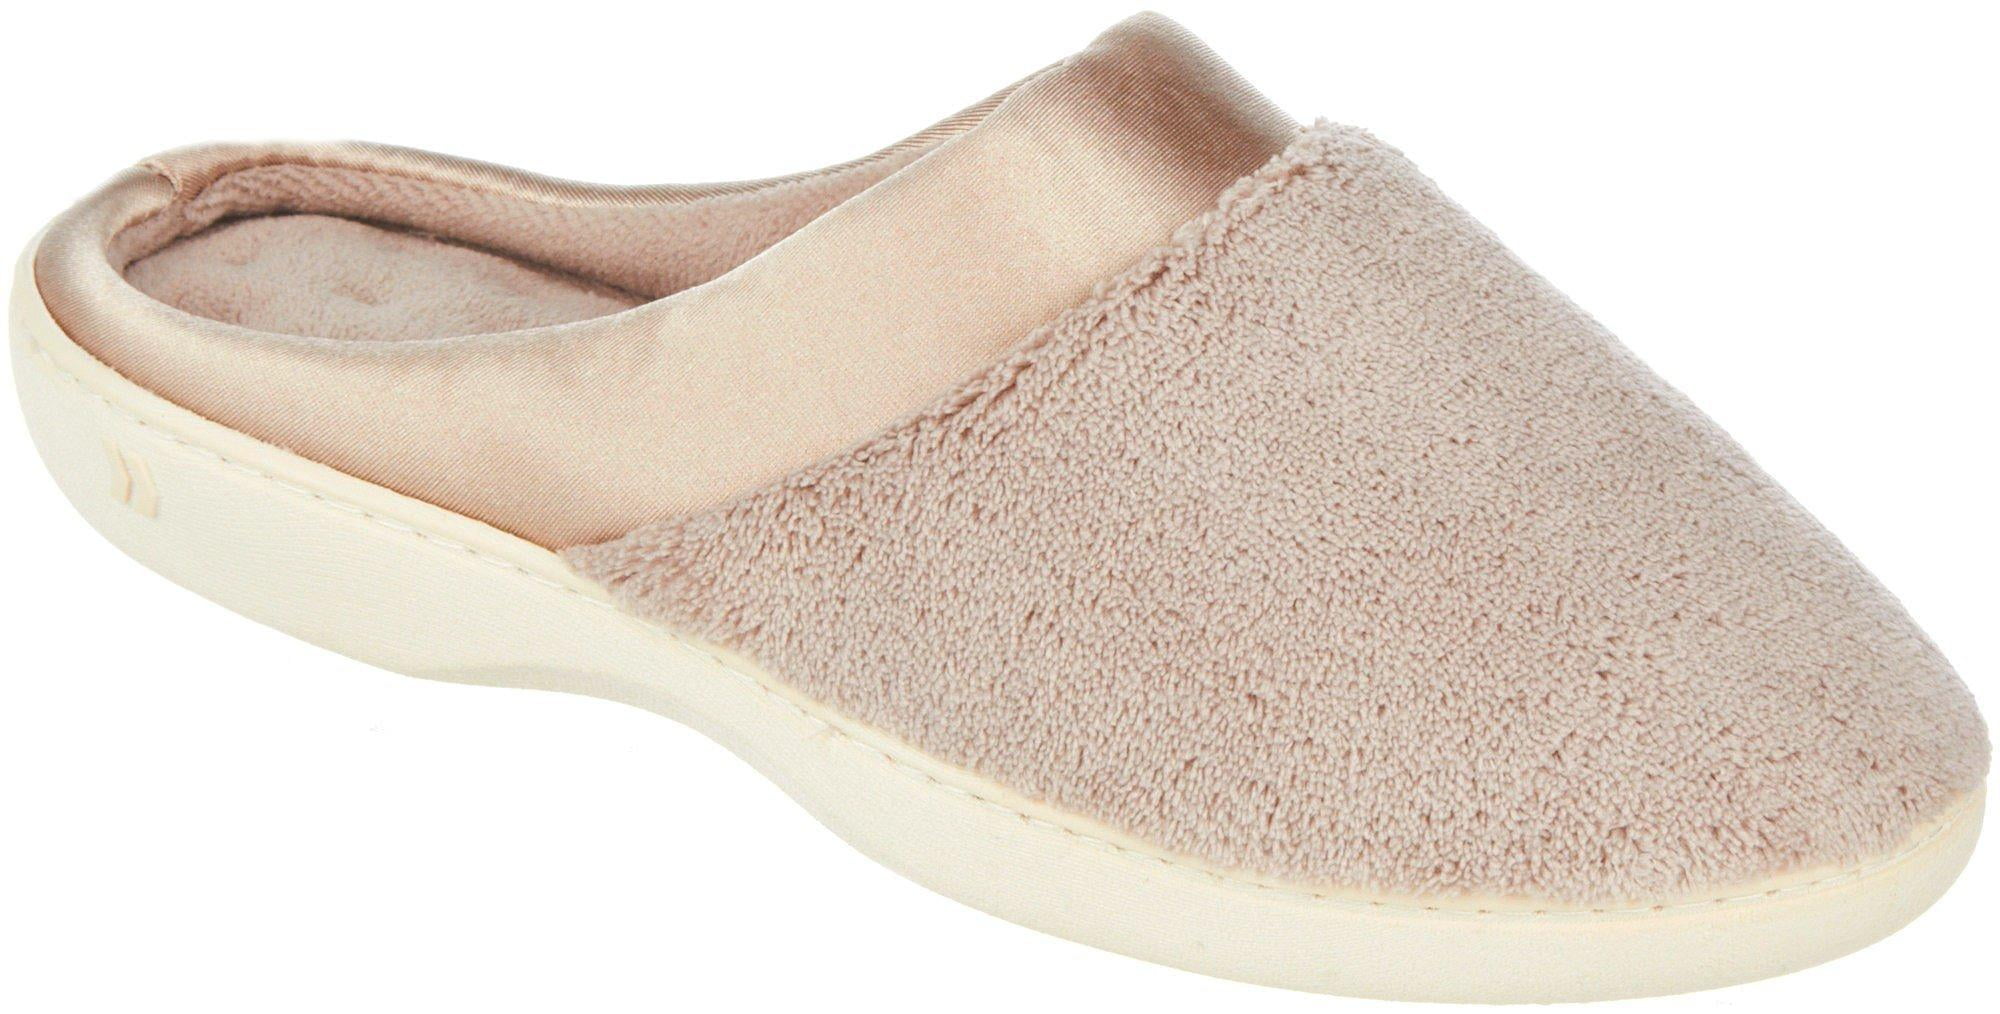 Isotoner Women's Microterry PillowStep Satin Cuff Clog Slippers 